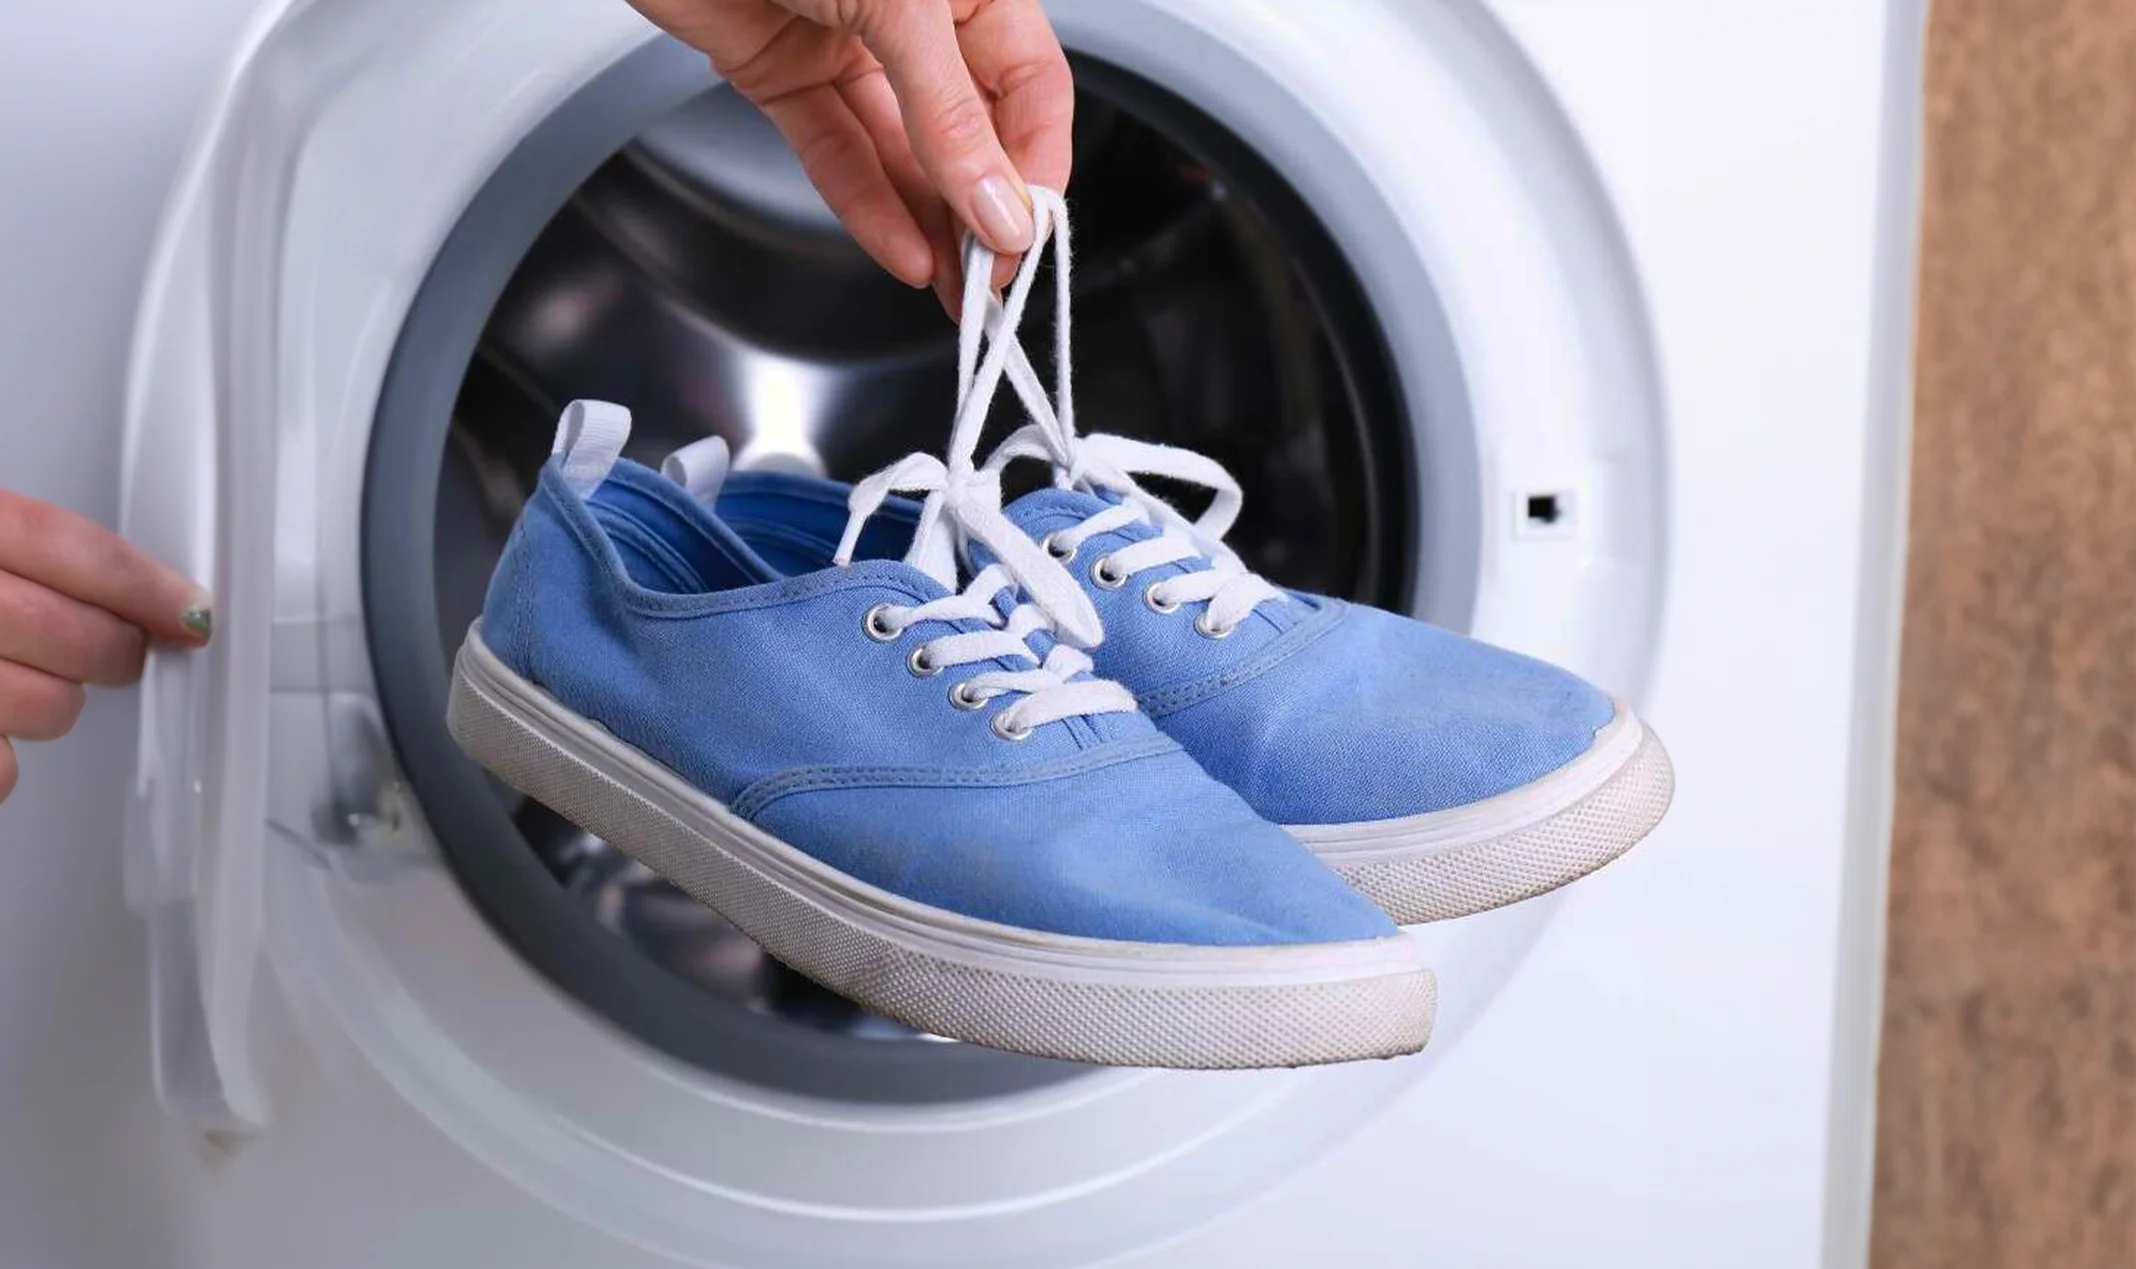 Can you wash tennis shoes with towels
